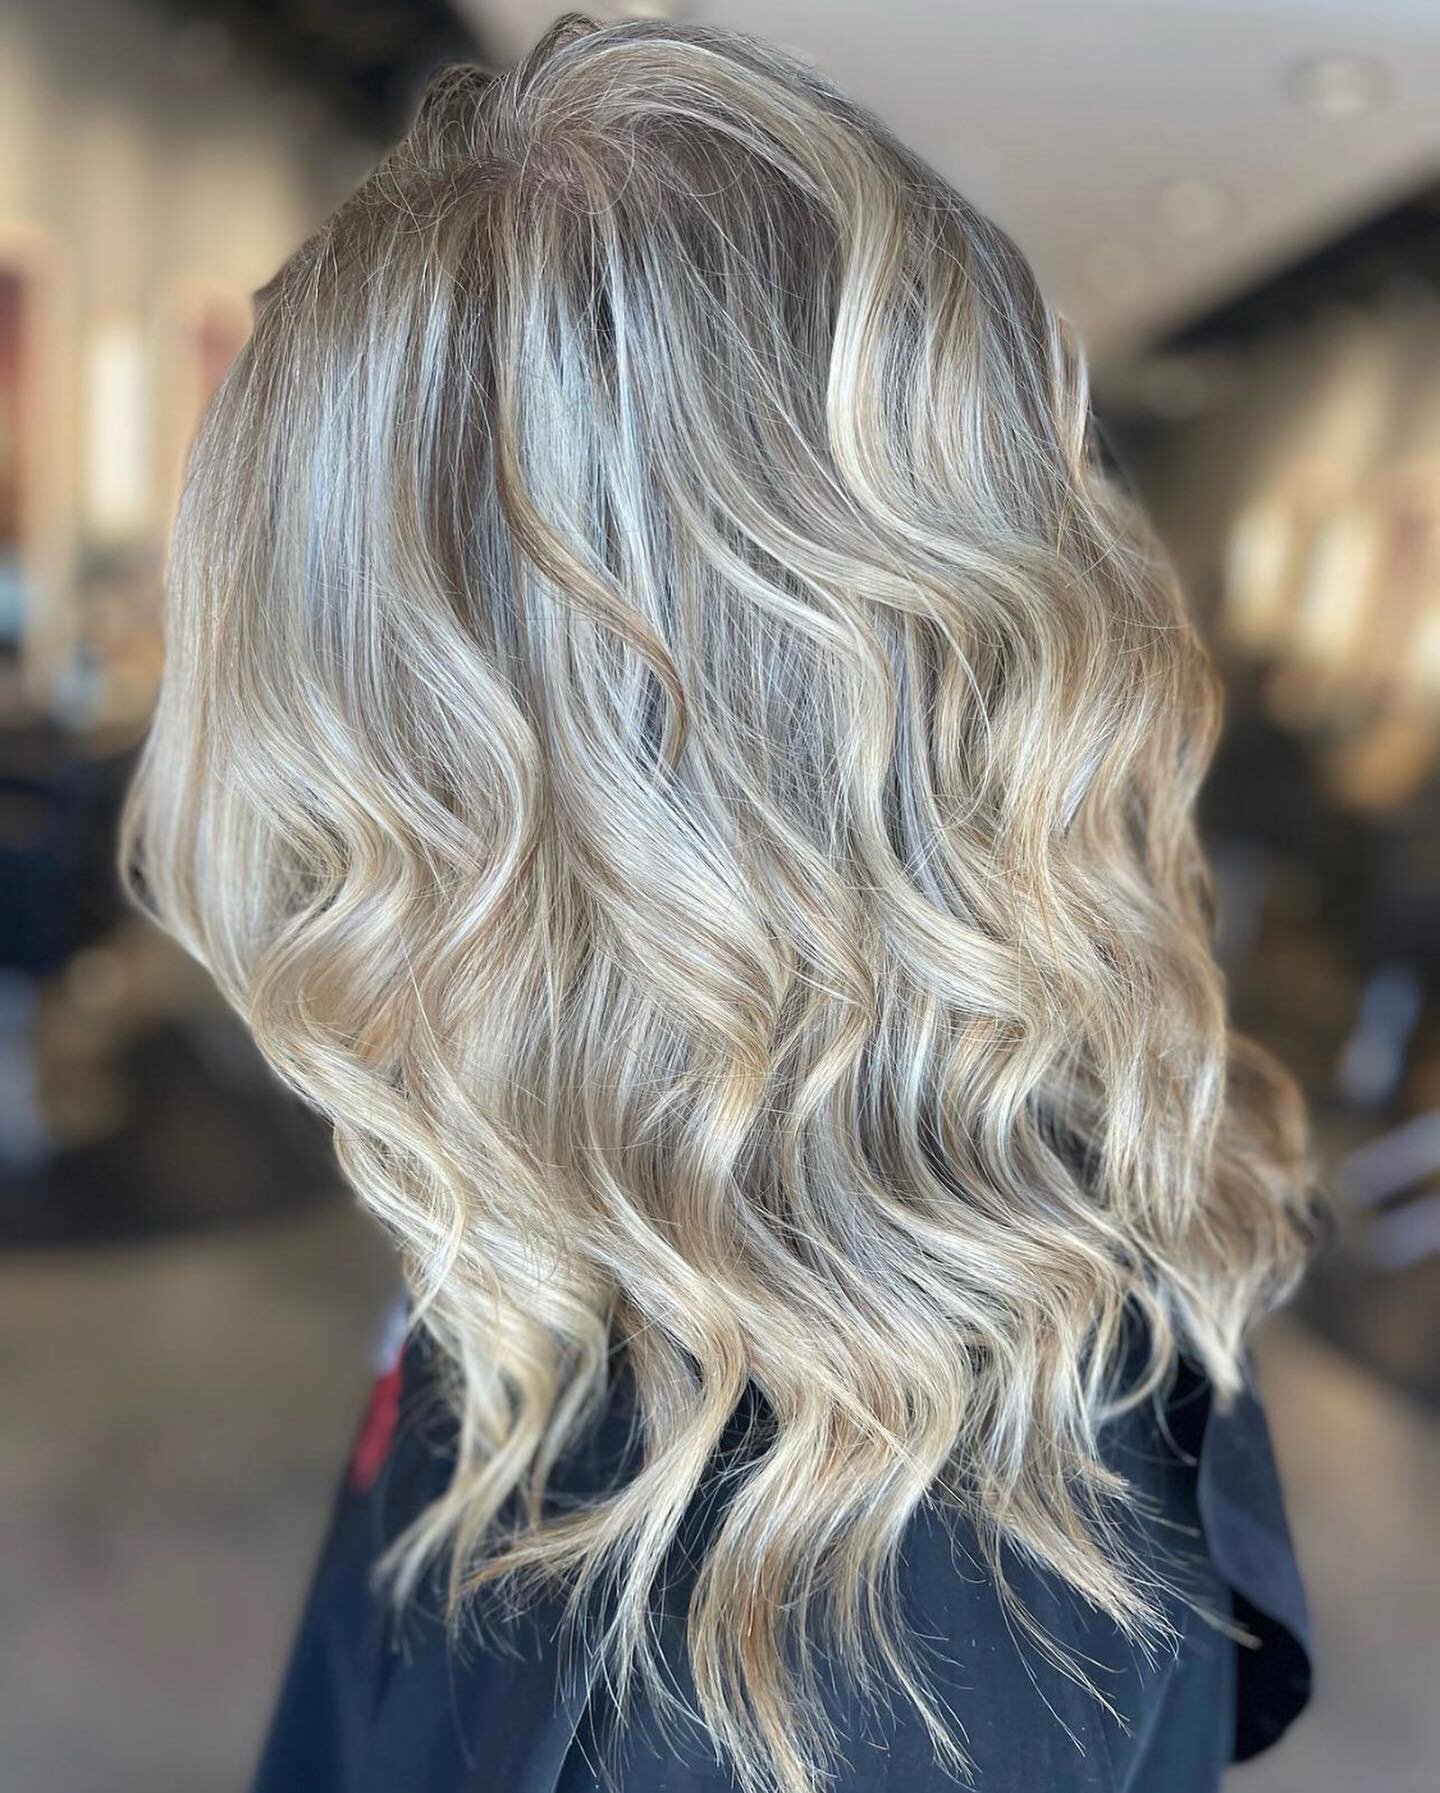 Summer Vibes ☀️&hellip; Hair by Brenna #balayage #babylights #studiovasi #cleveland #strongsville